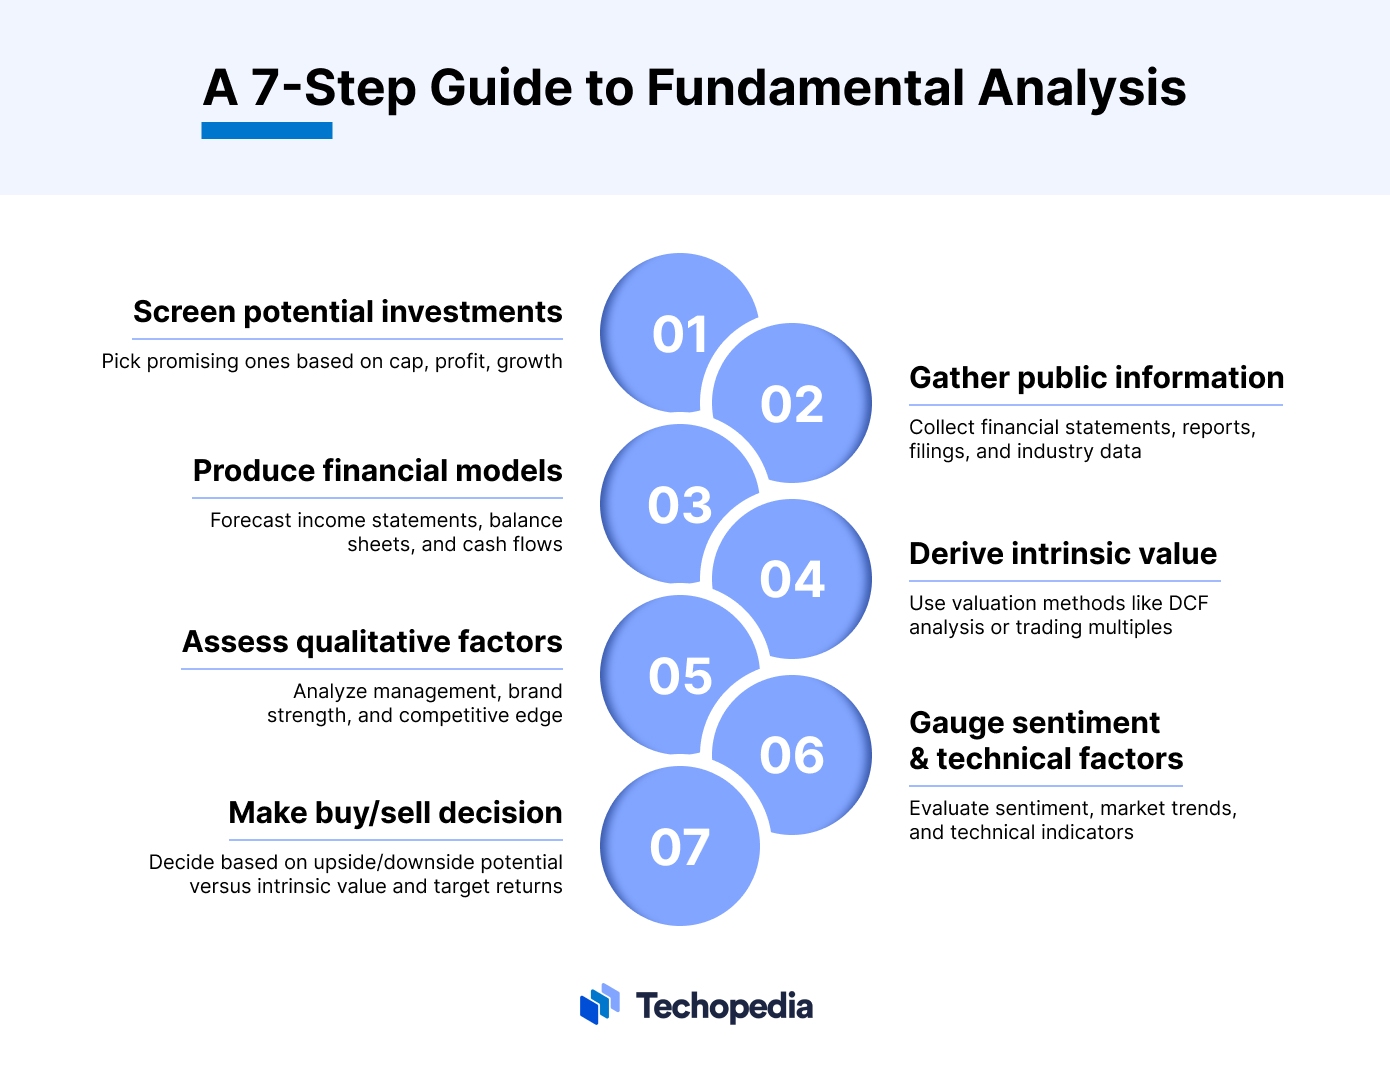 A 7-Step Guide to Fundamental Analysis